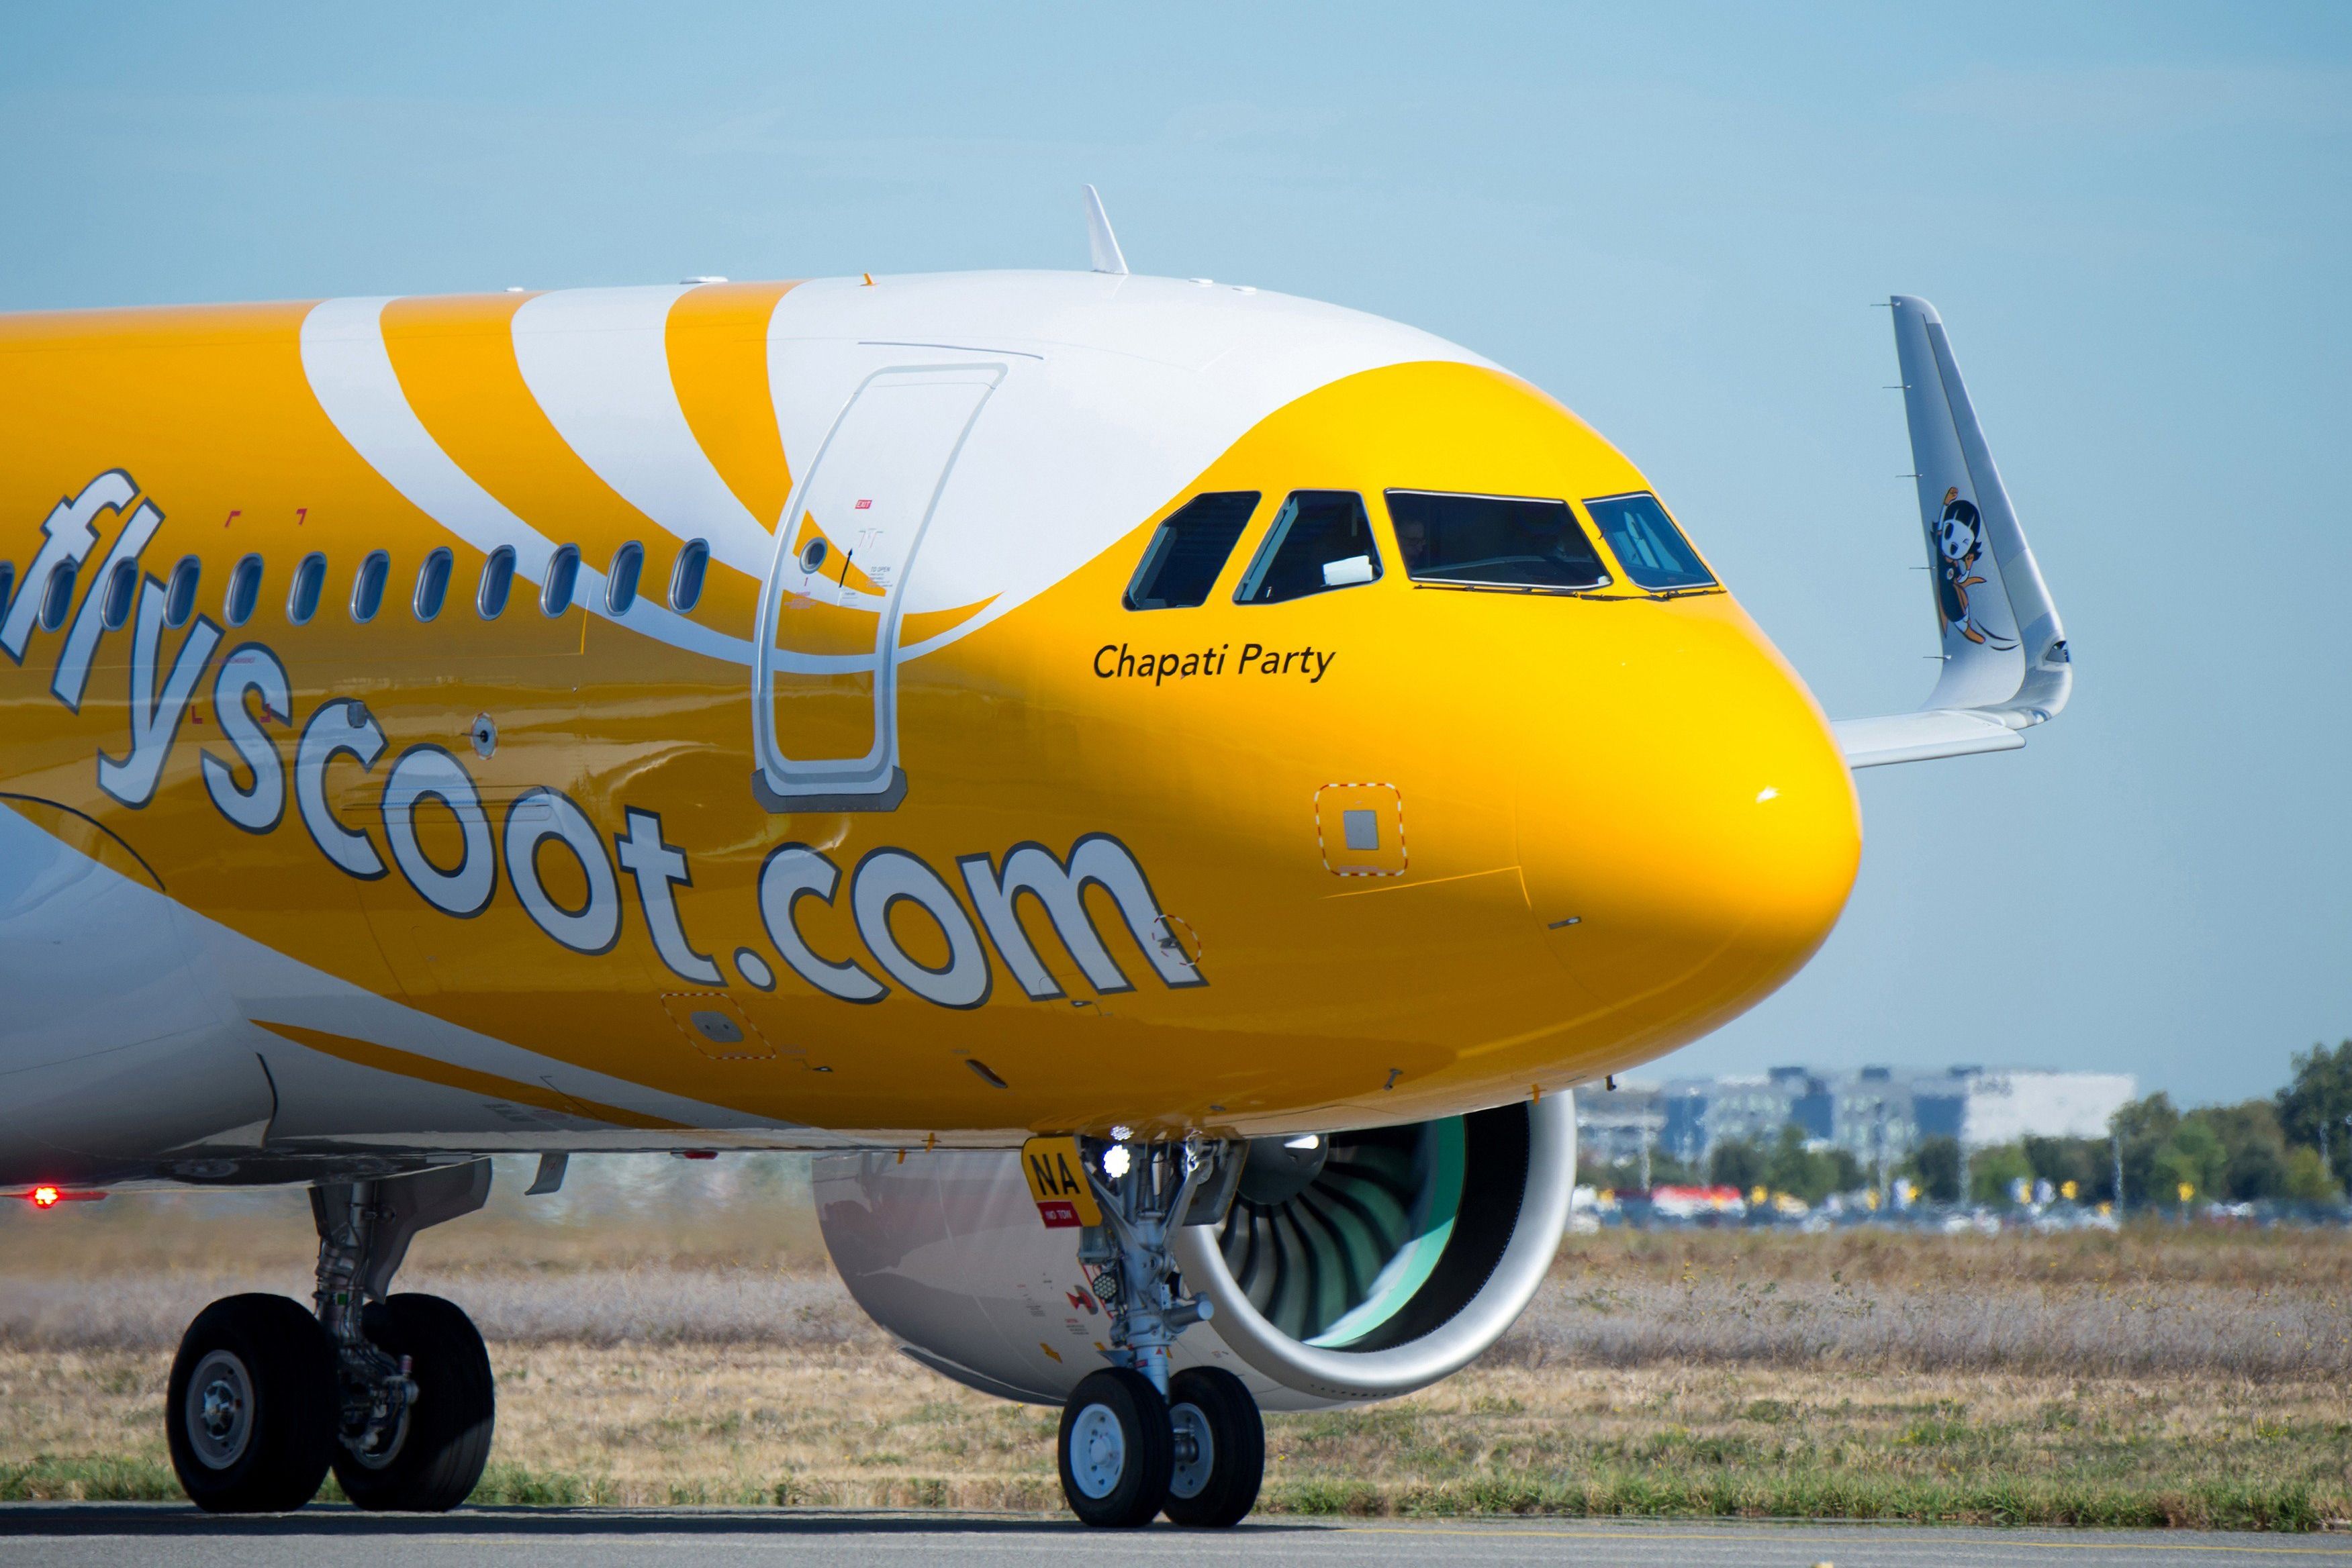 Scoot Airbus A321neo.